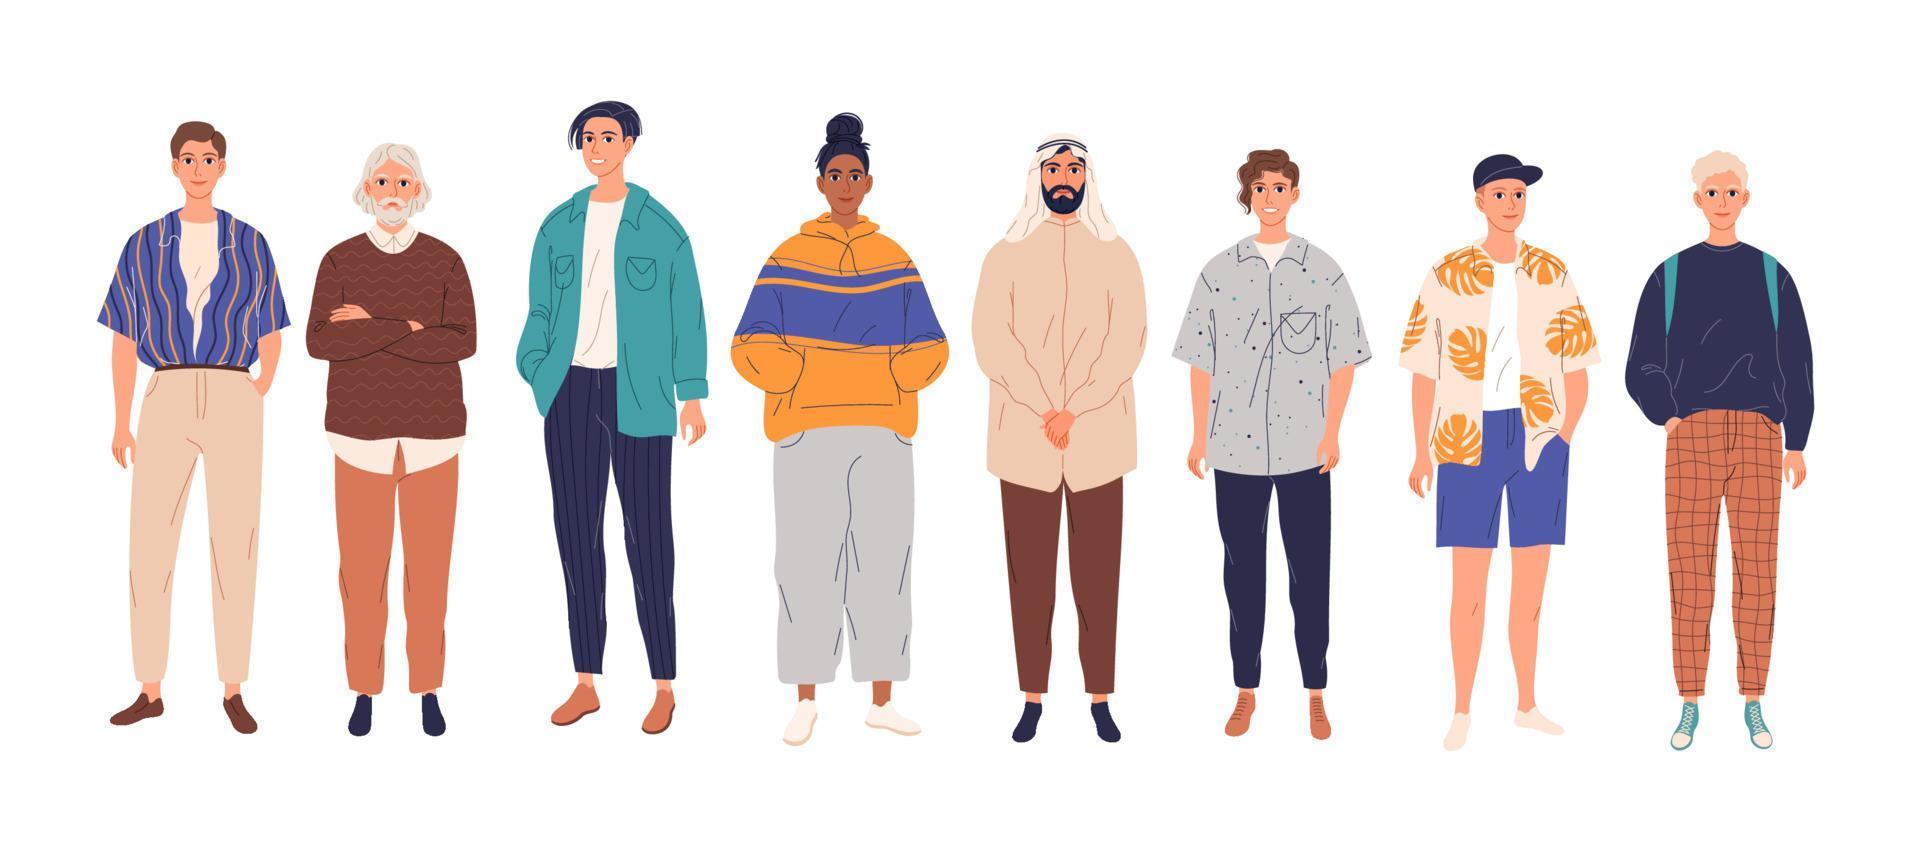 Diverse group of young men standing together. Flat cartoon vector illustration.